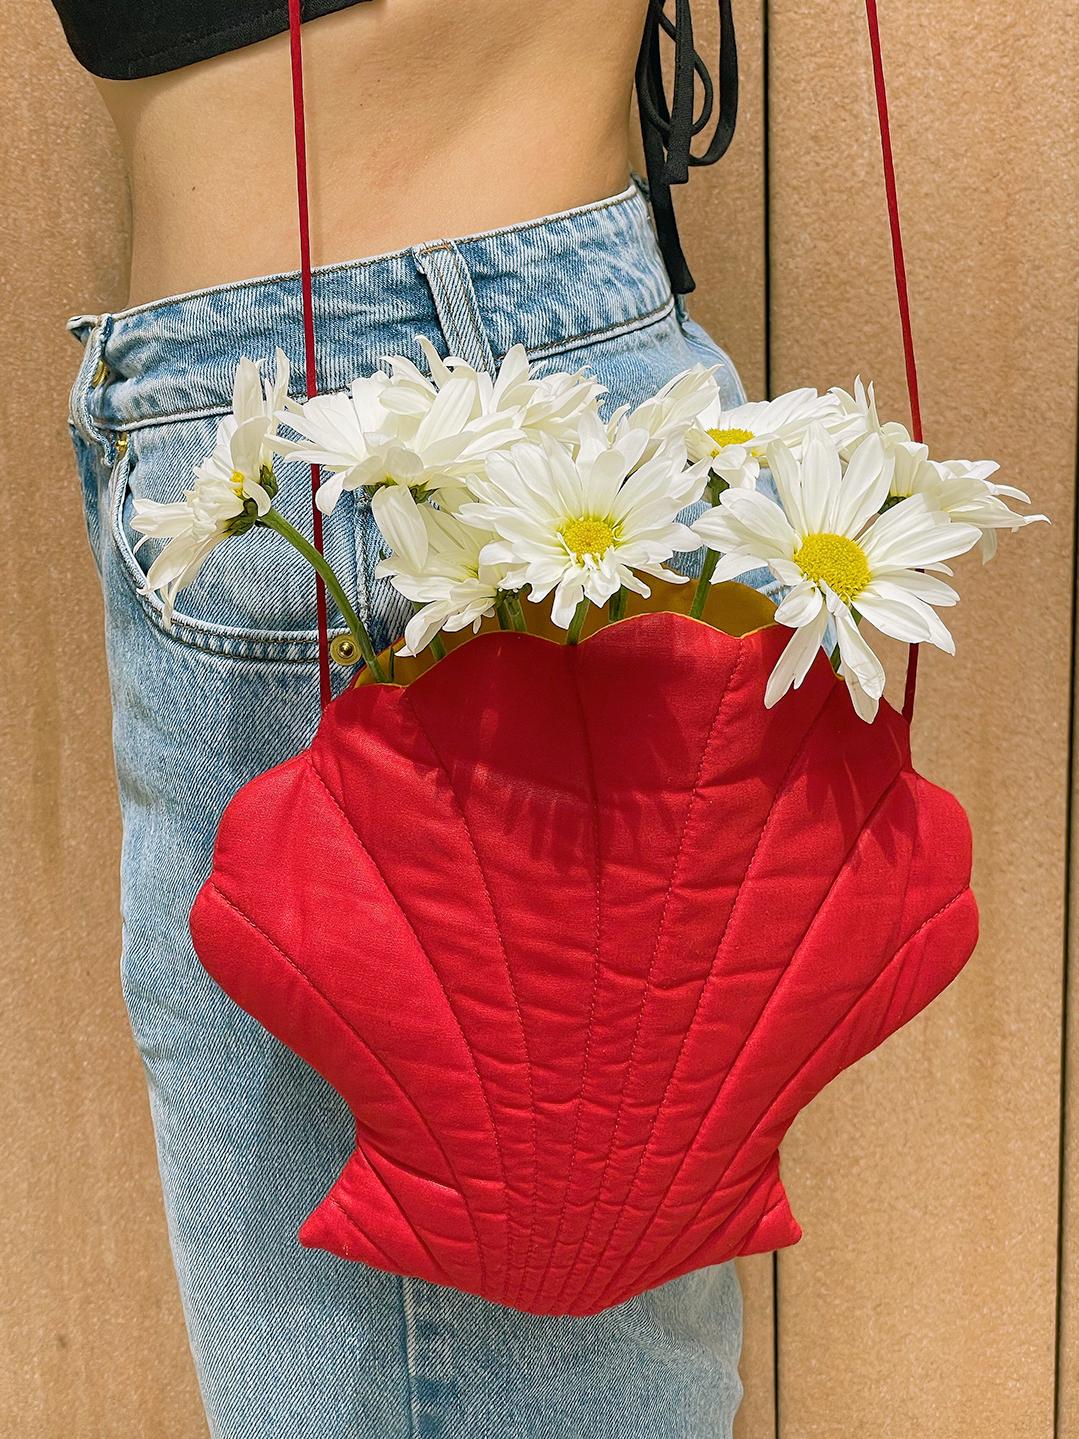 This vintage seashell purse is so sweet! I have a soft spot for anything shell-shaped, and I love that this bag is slightly quilted, with seams to emphasize the shape of a scallop shell. The bright red color is a surprisingly versatile addition to